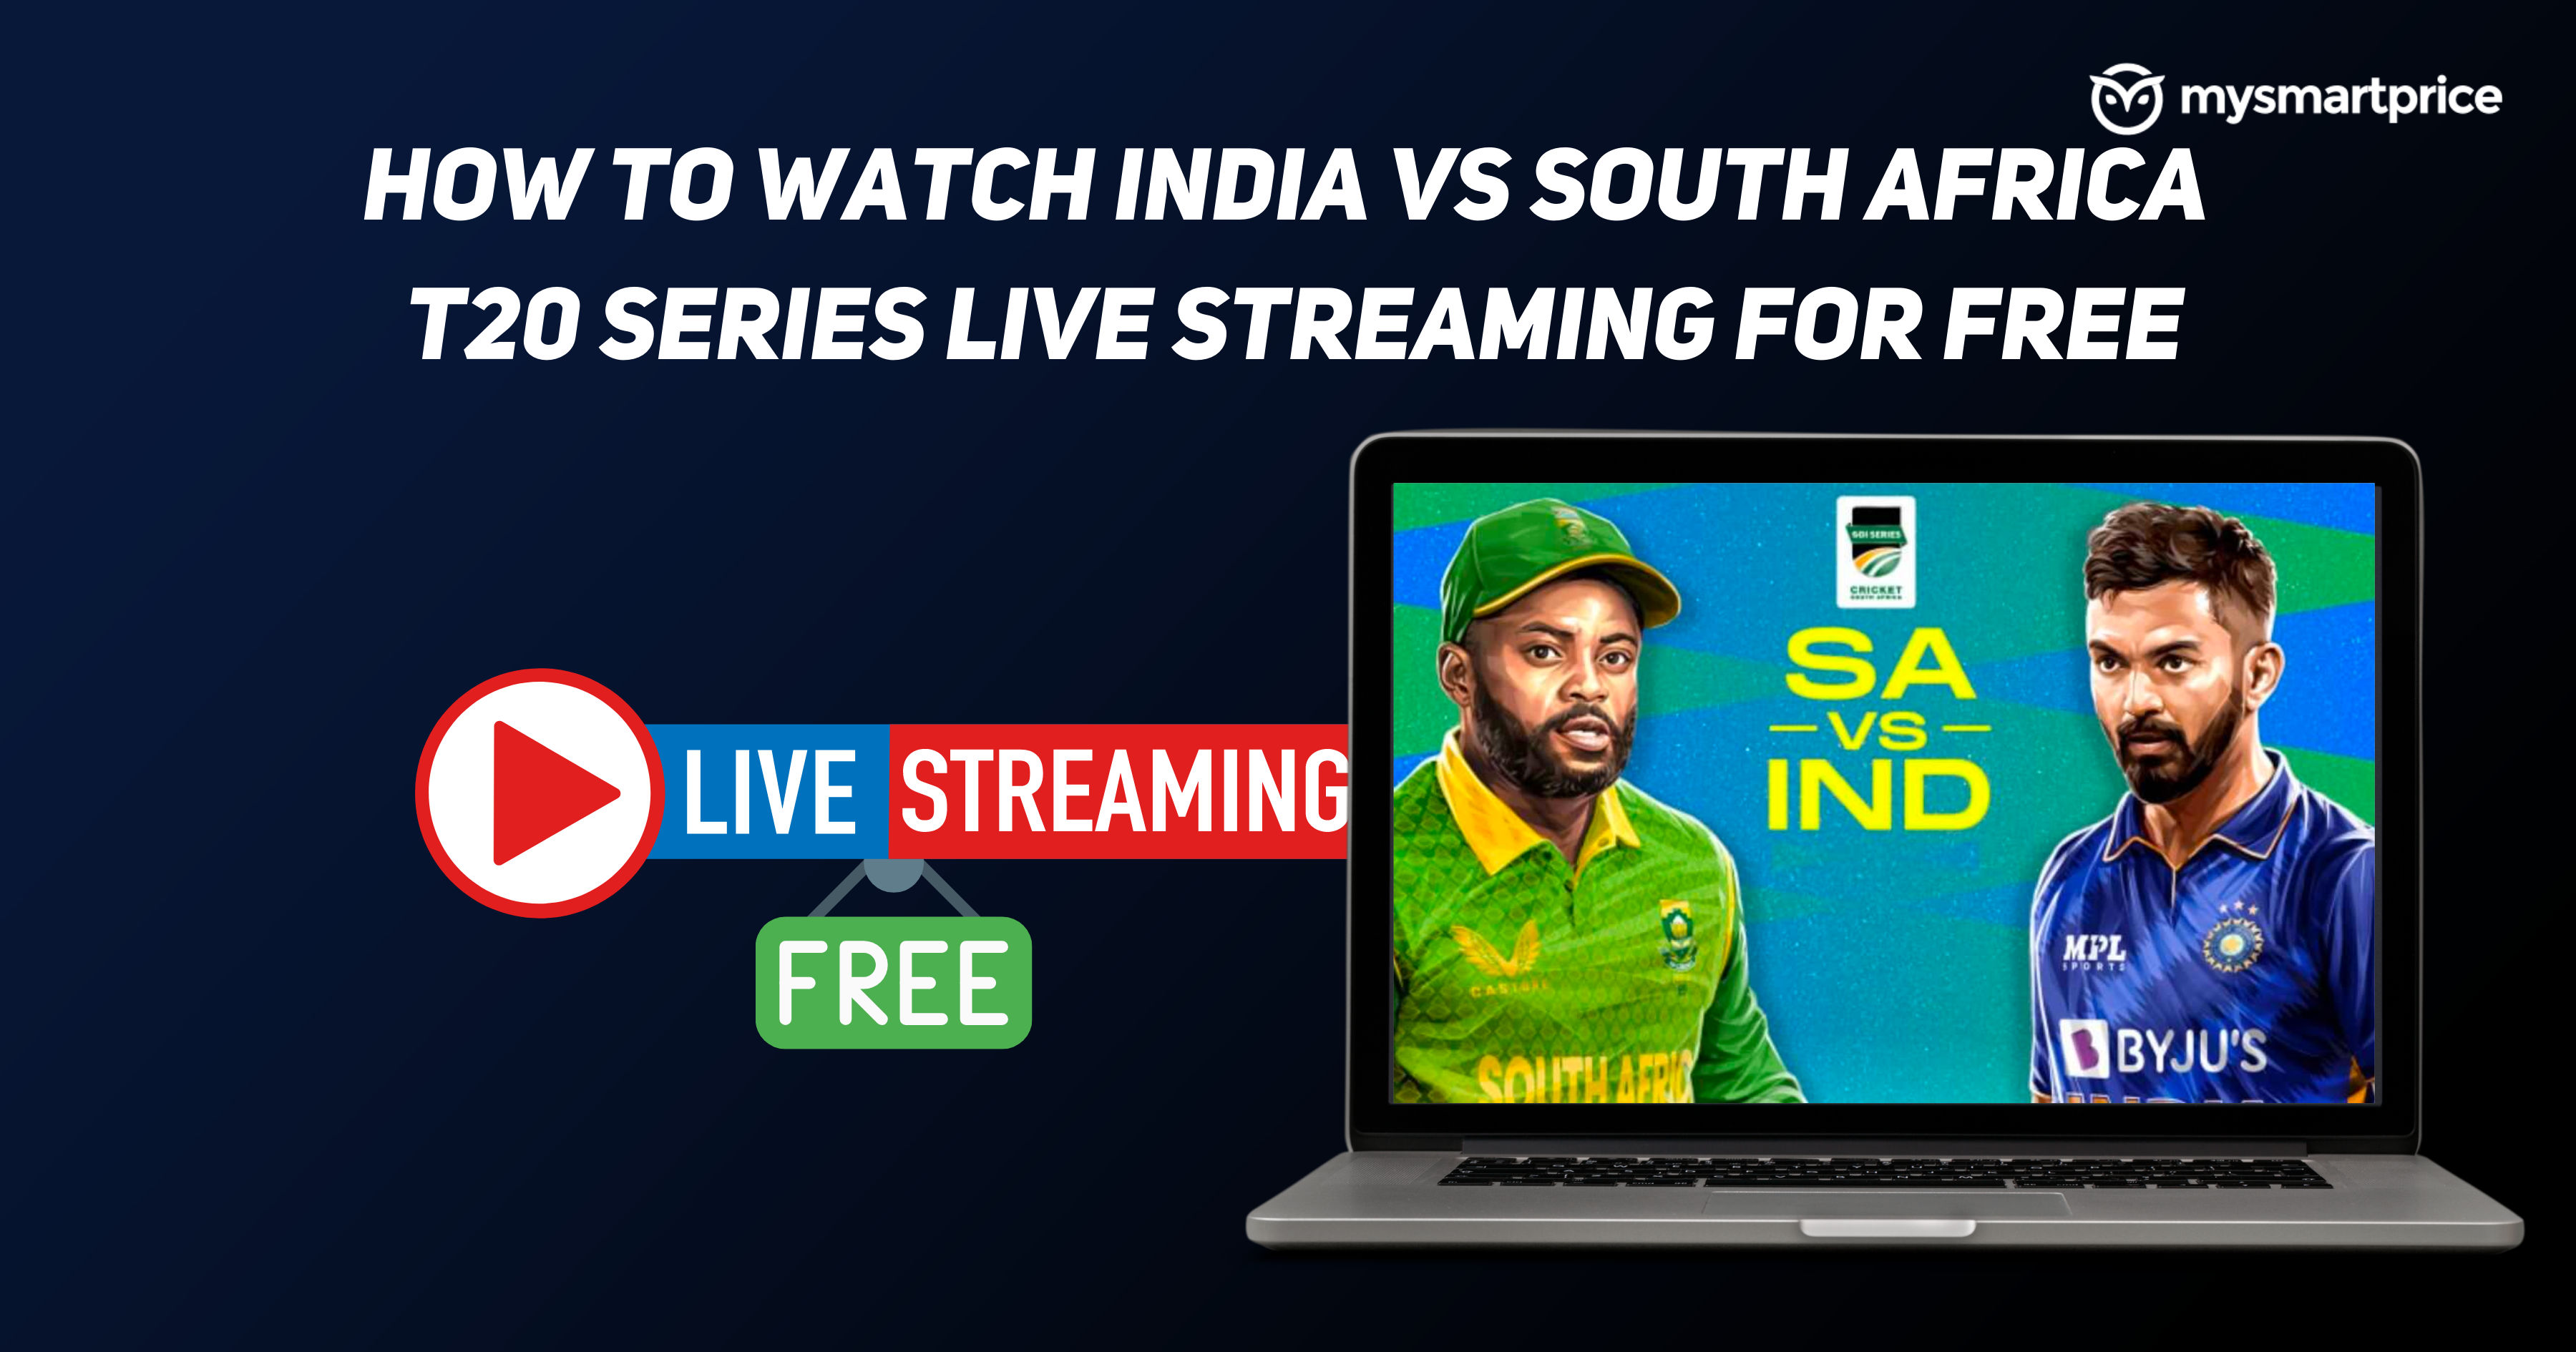 icc t20 live match today